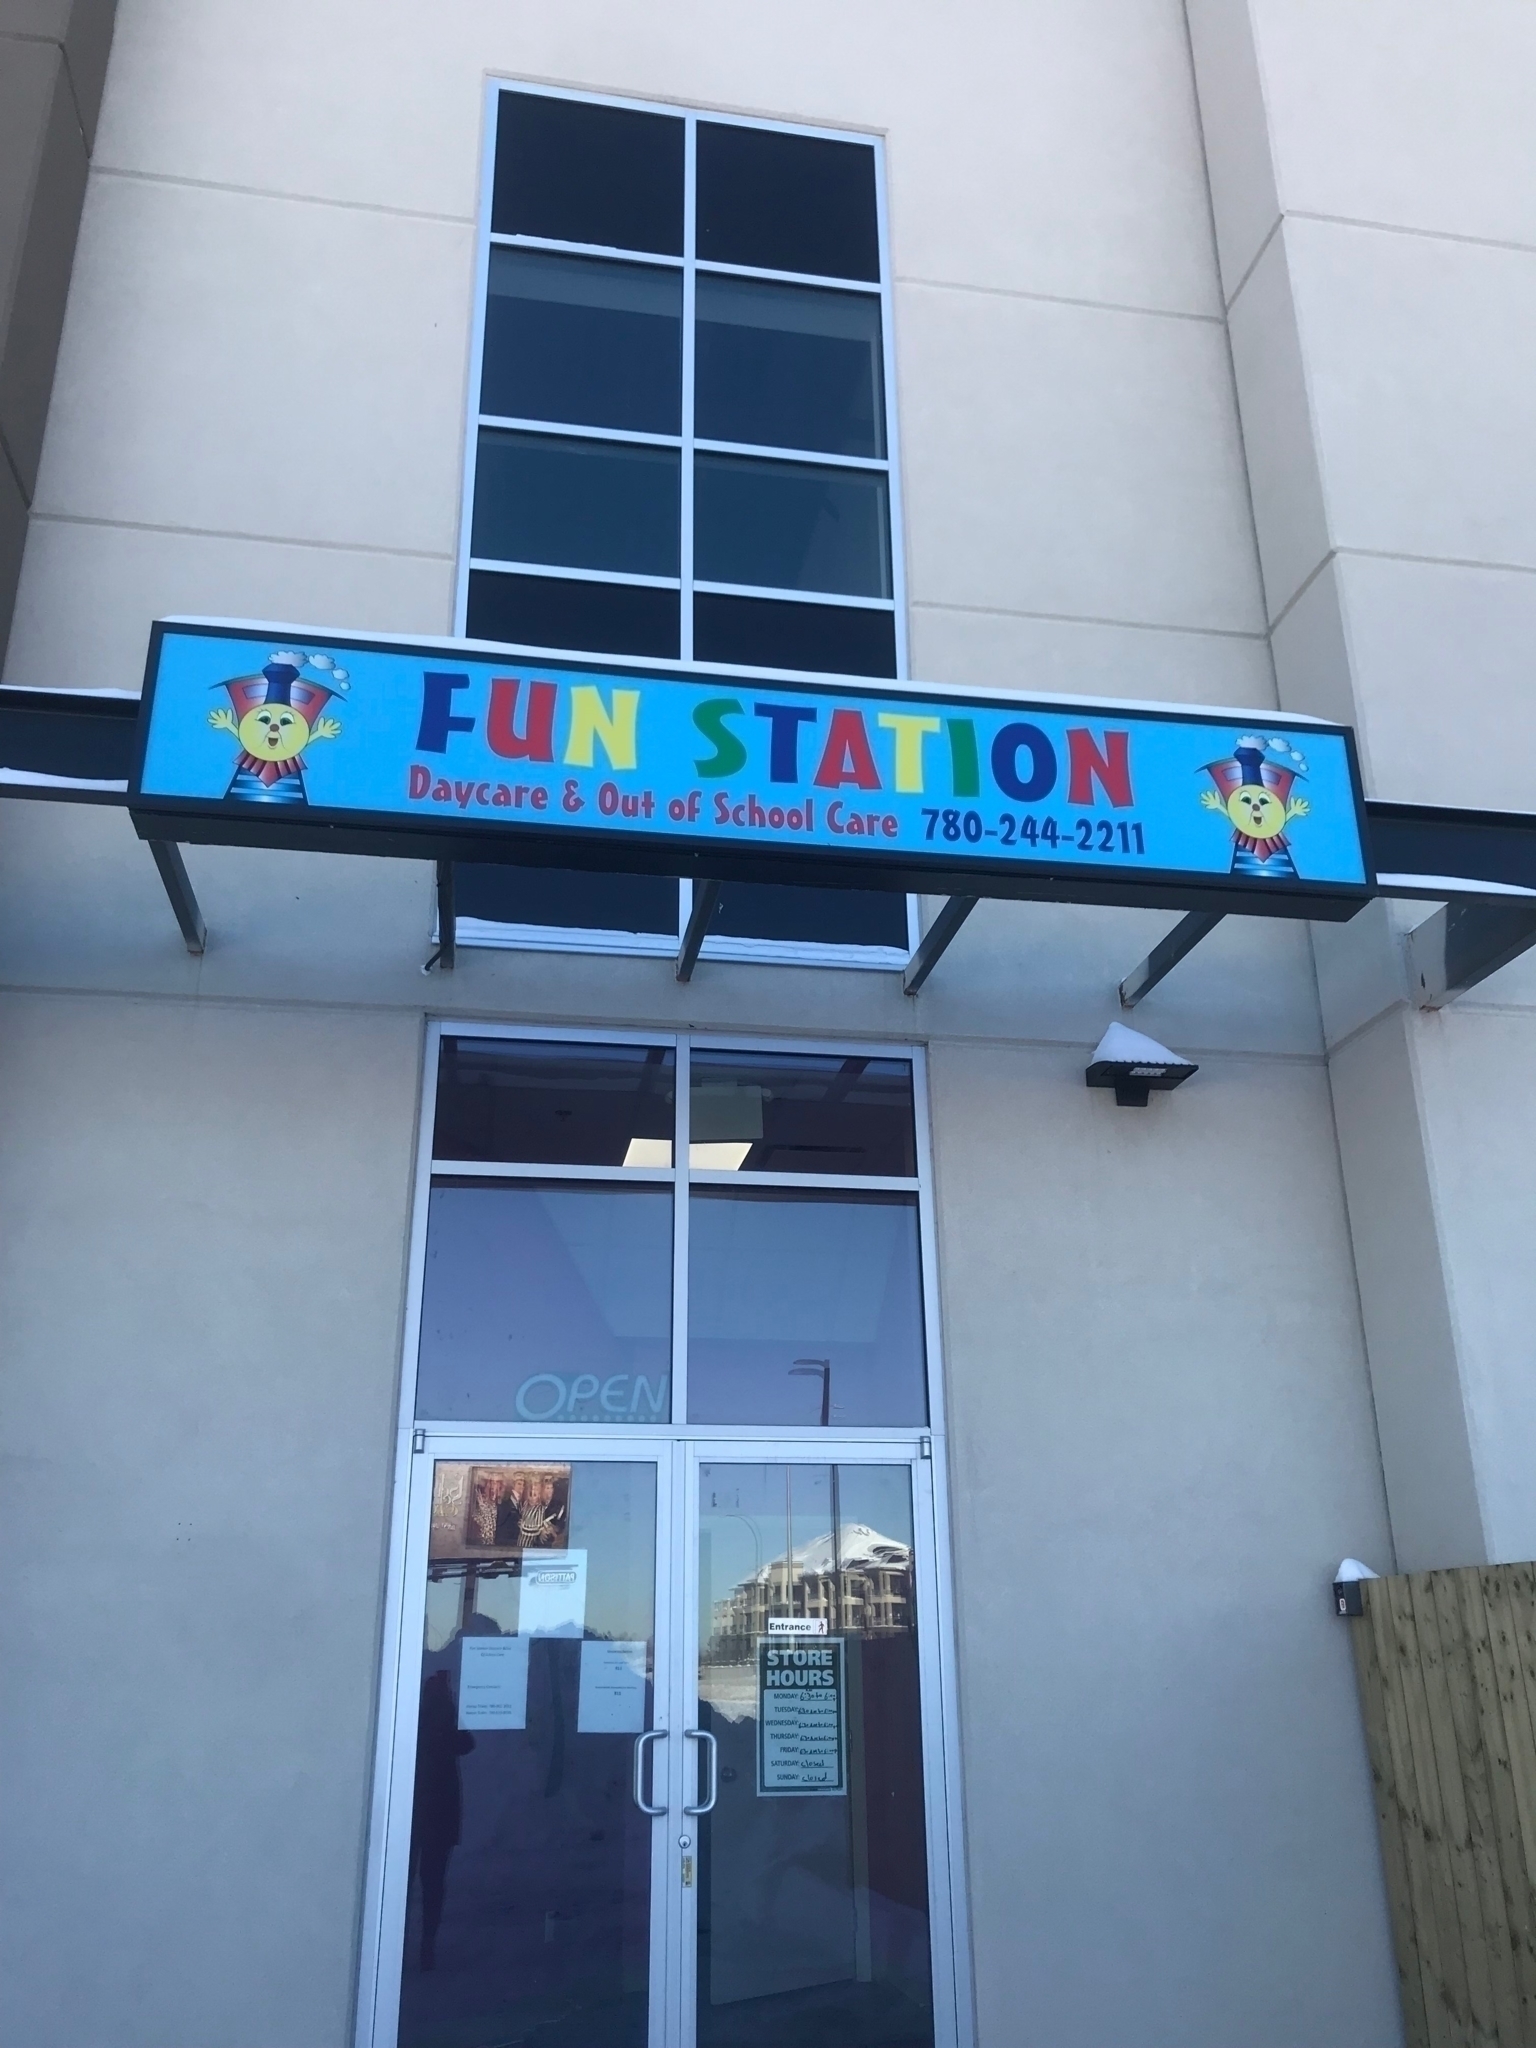 Fun Station Daycare & After School Care - Childcare Services